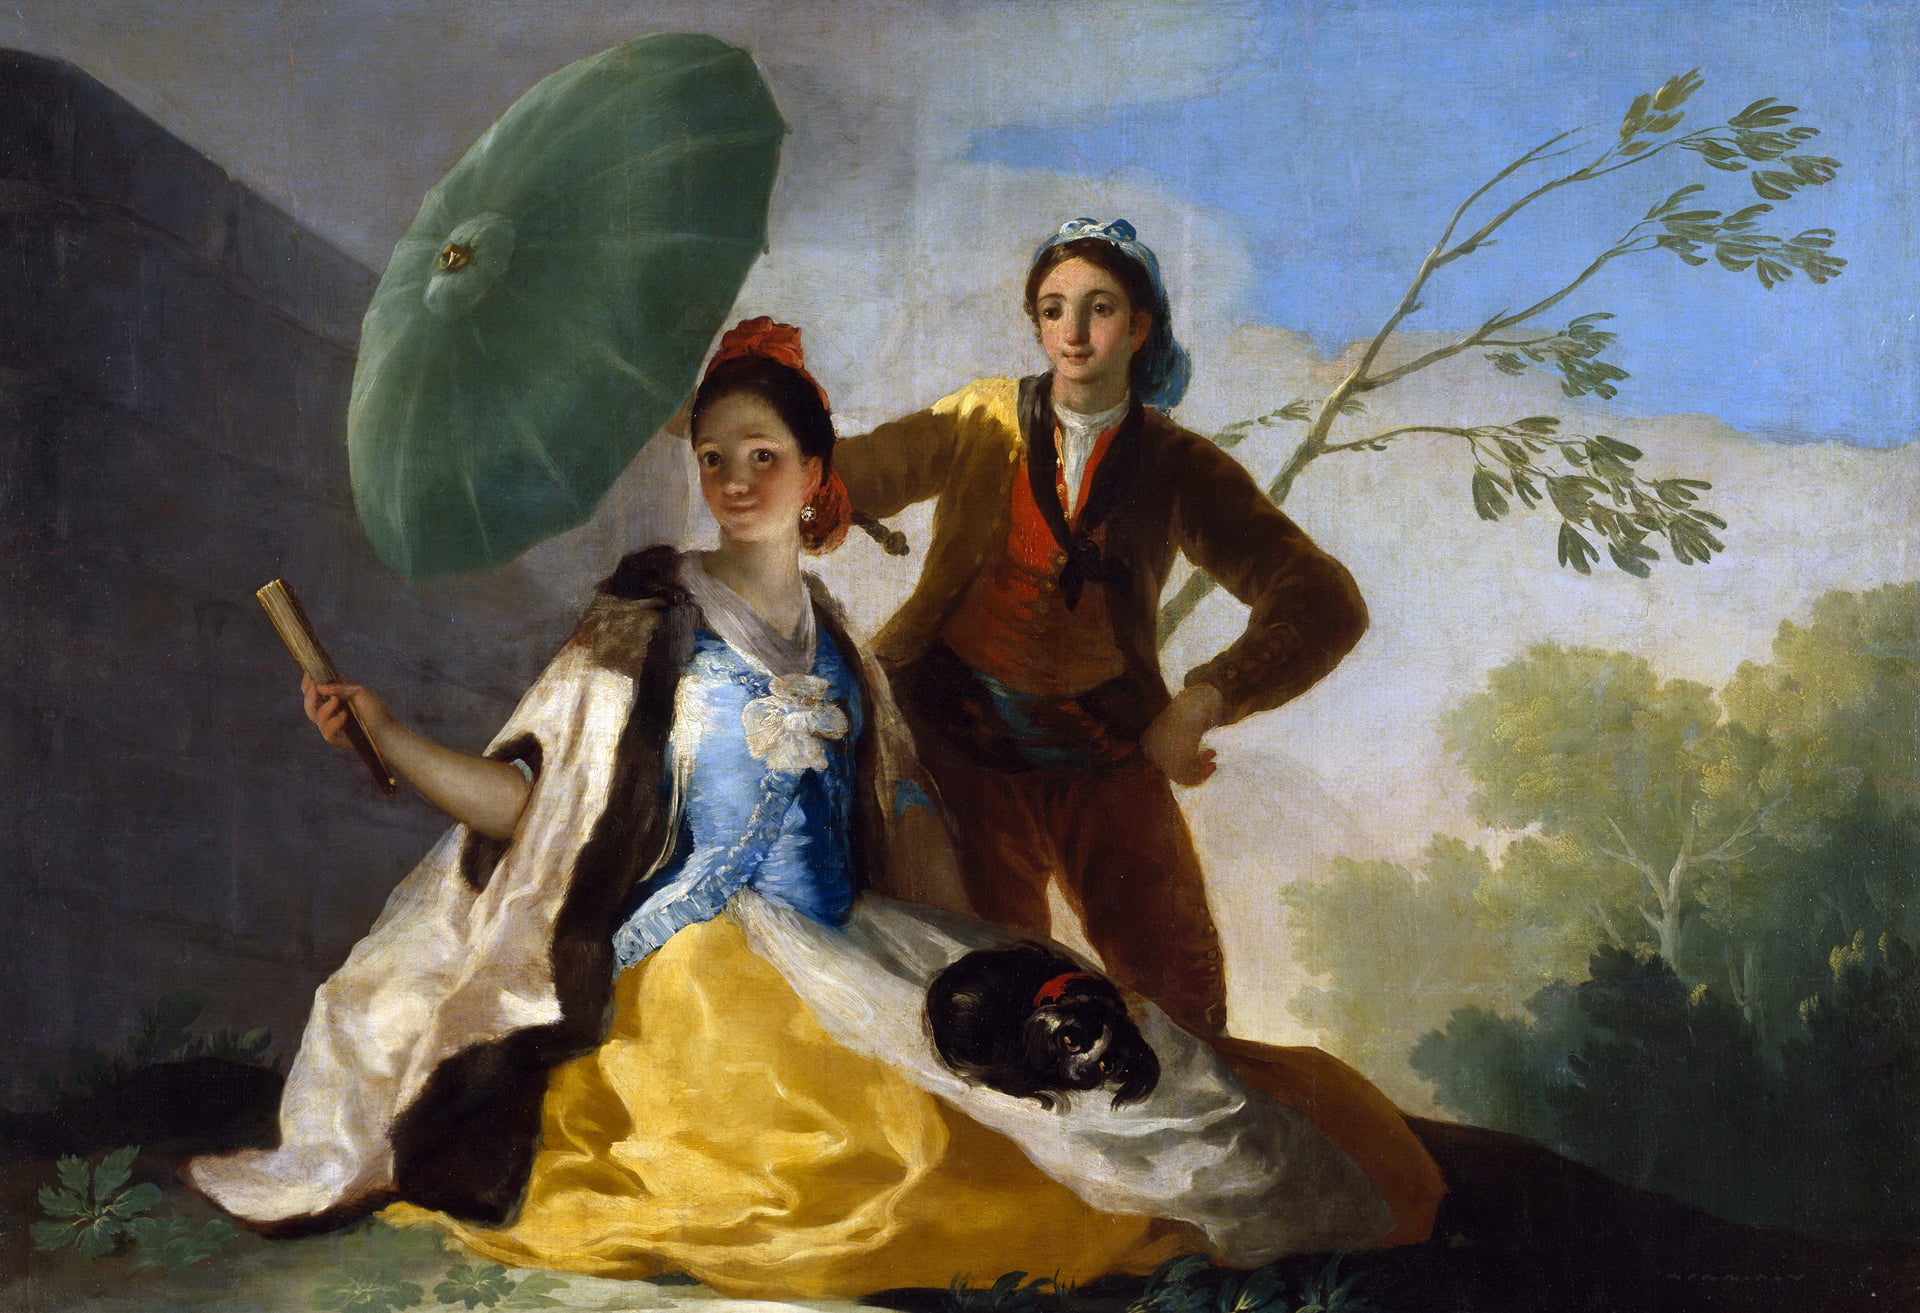 picture, Umbrella, lovers, genre, Francisco Goya, two people